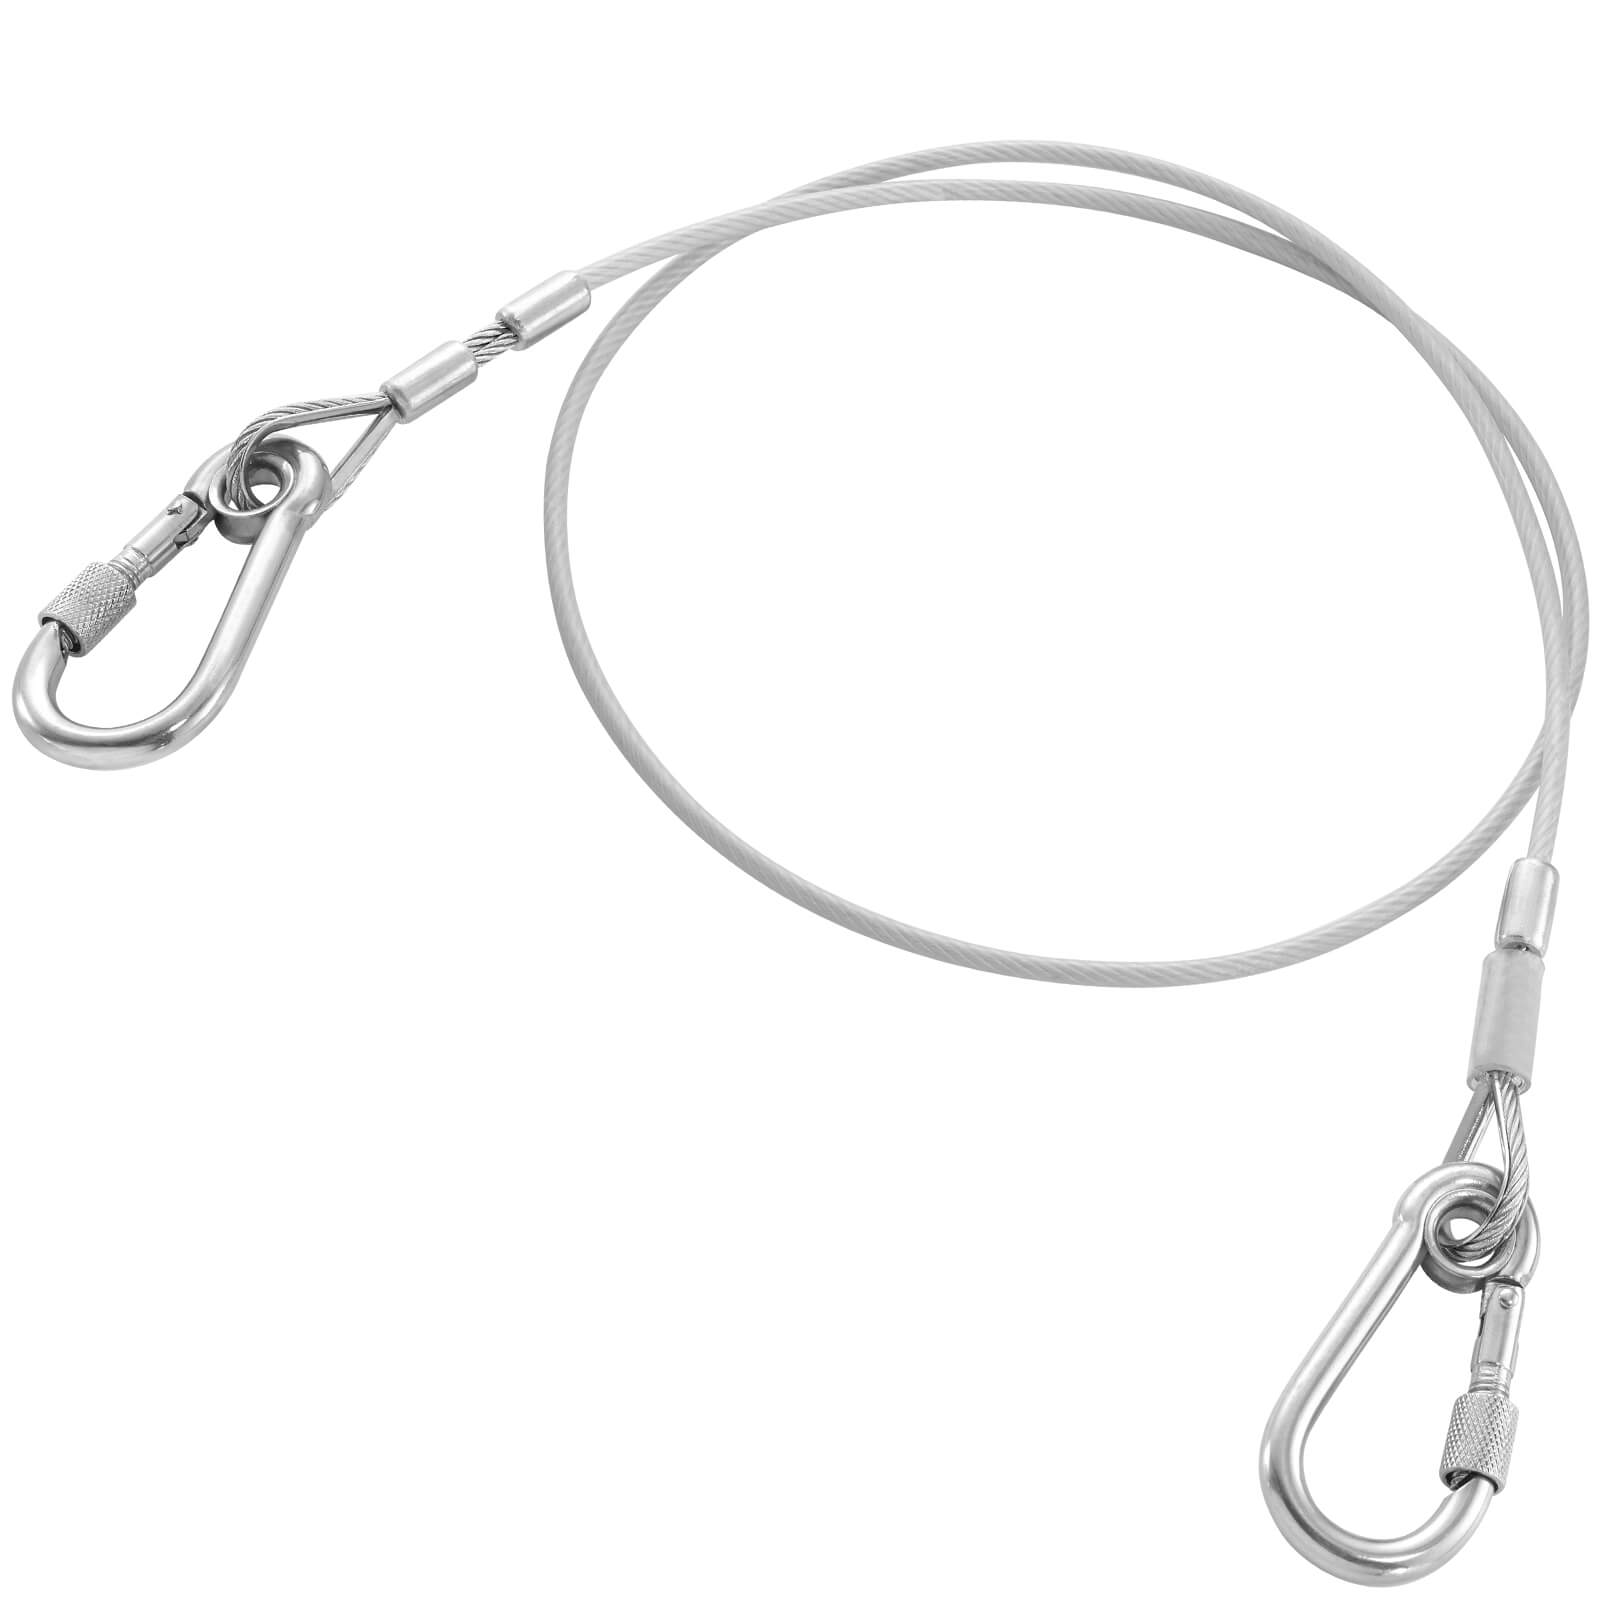 Image of Facom SLS Safety Lock System Steel Lanyard Cable